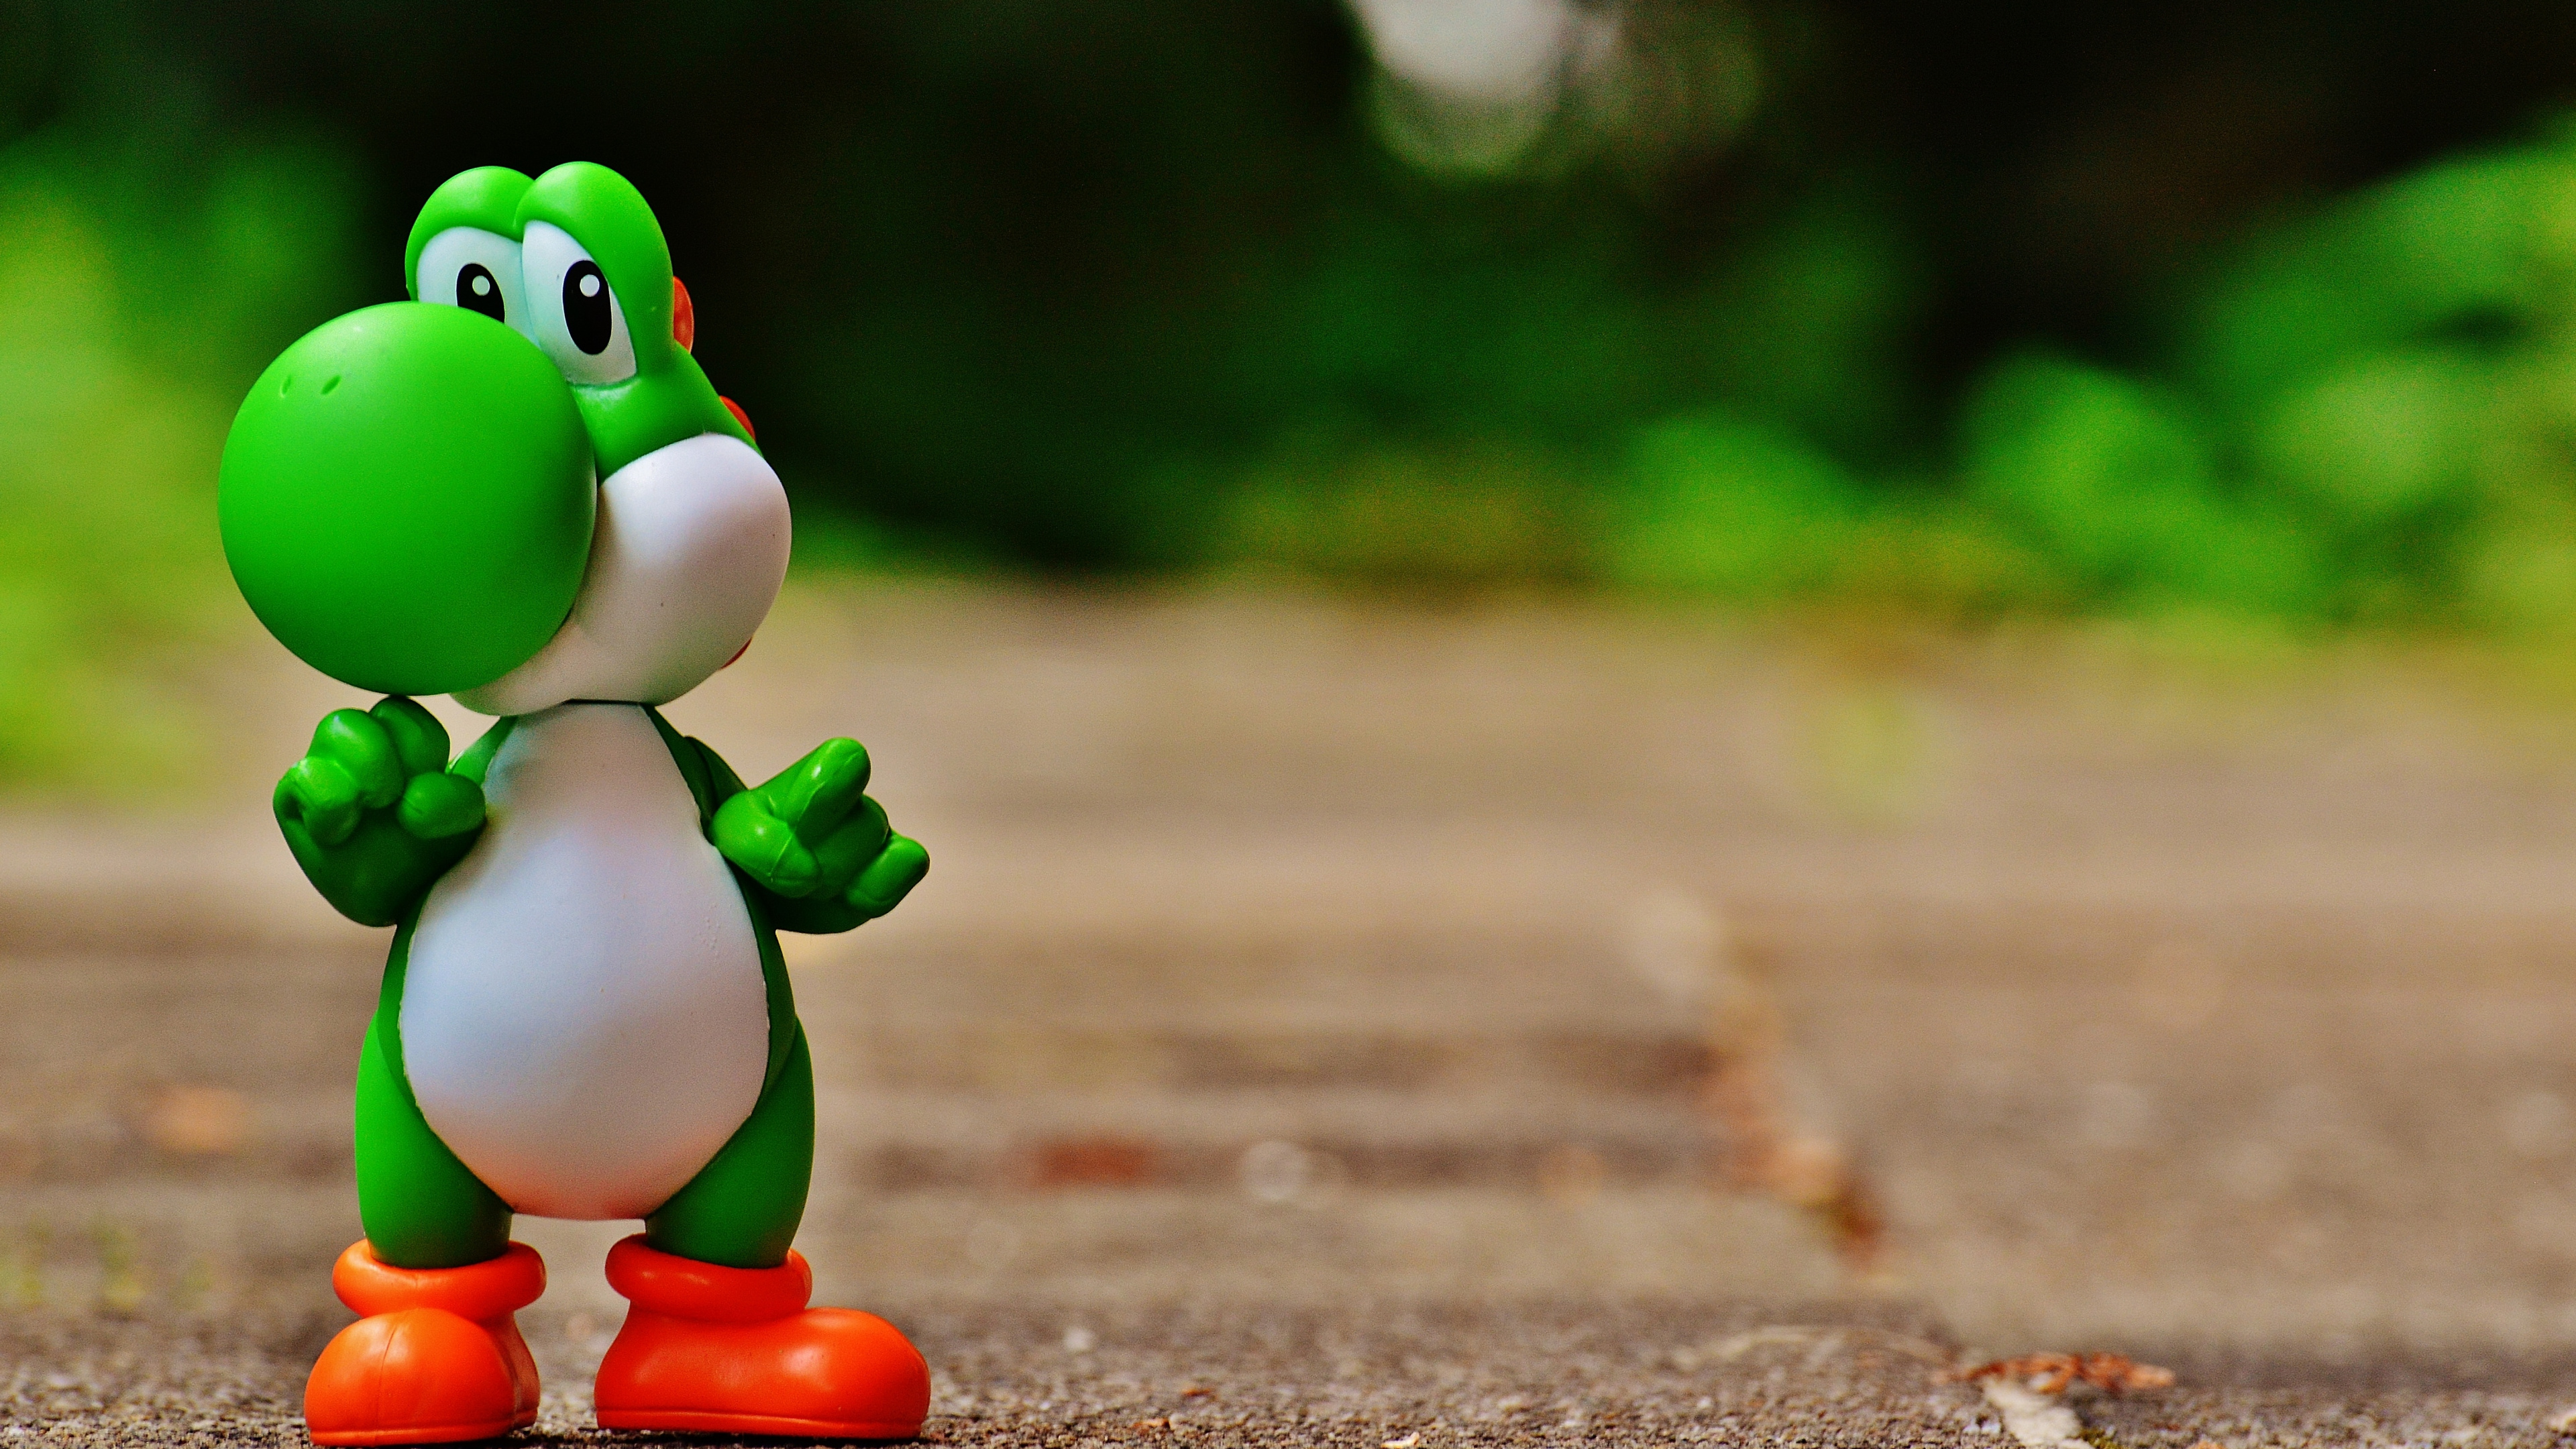 Yoshis Island, Super Mario World, Green, Toy, Action Figure. Wallpaper in 3840x2160 Resolution